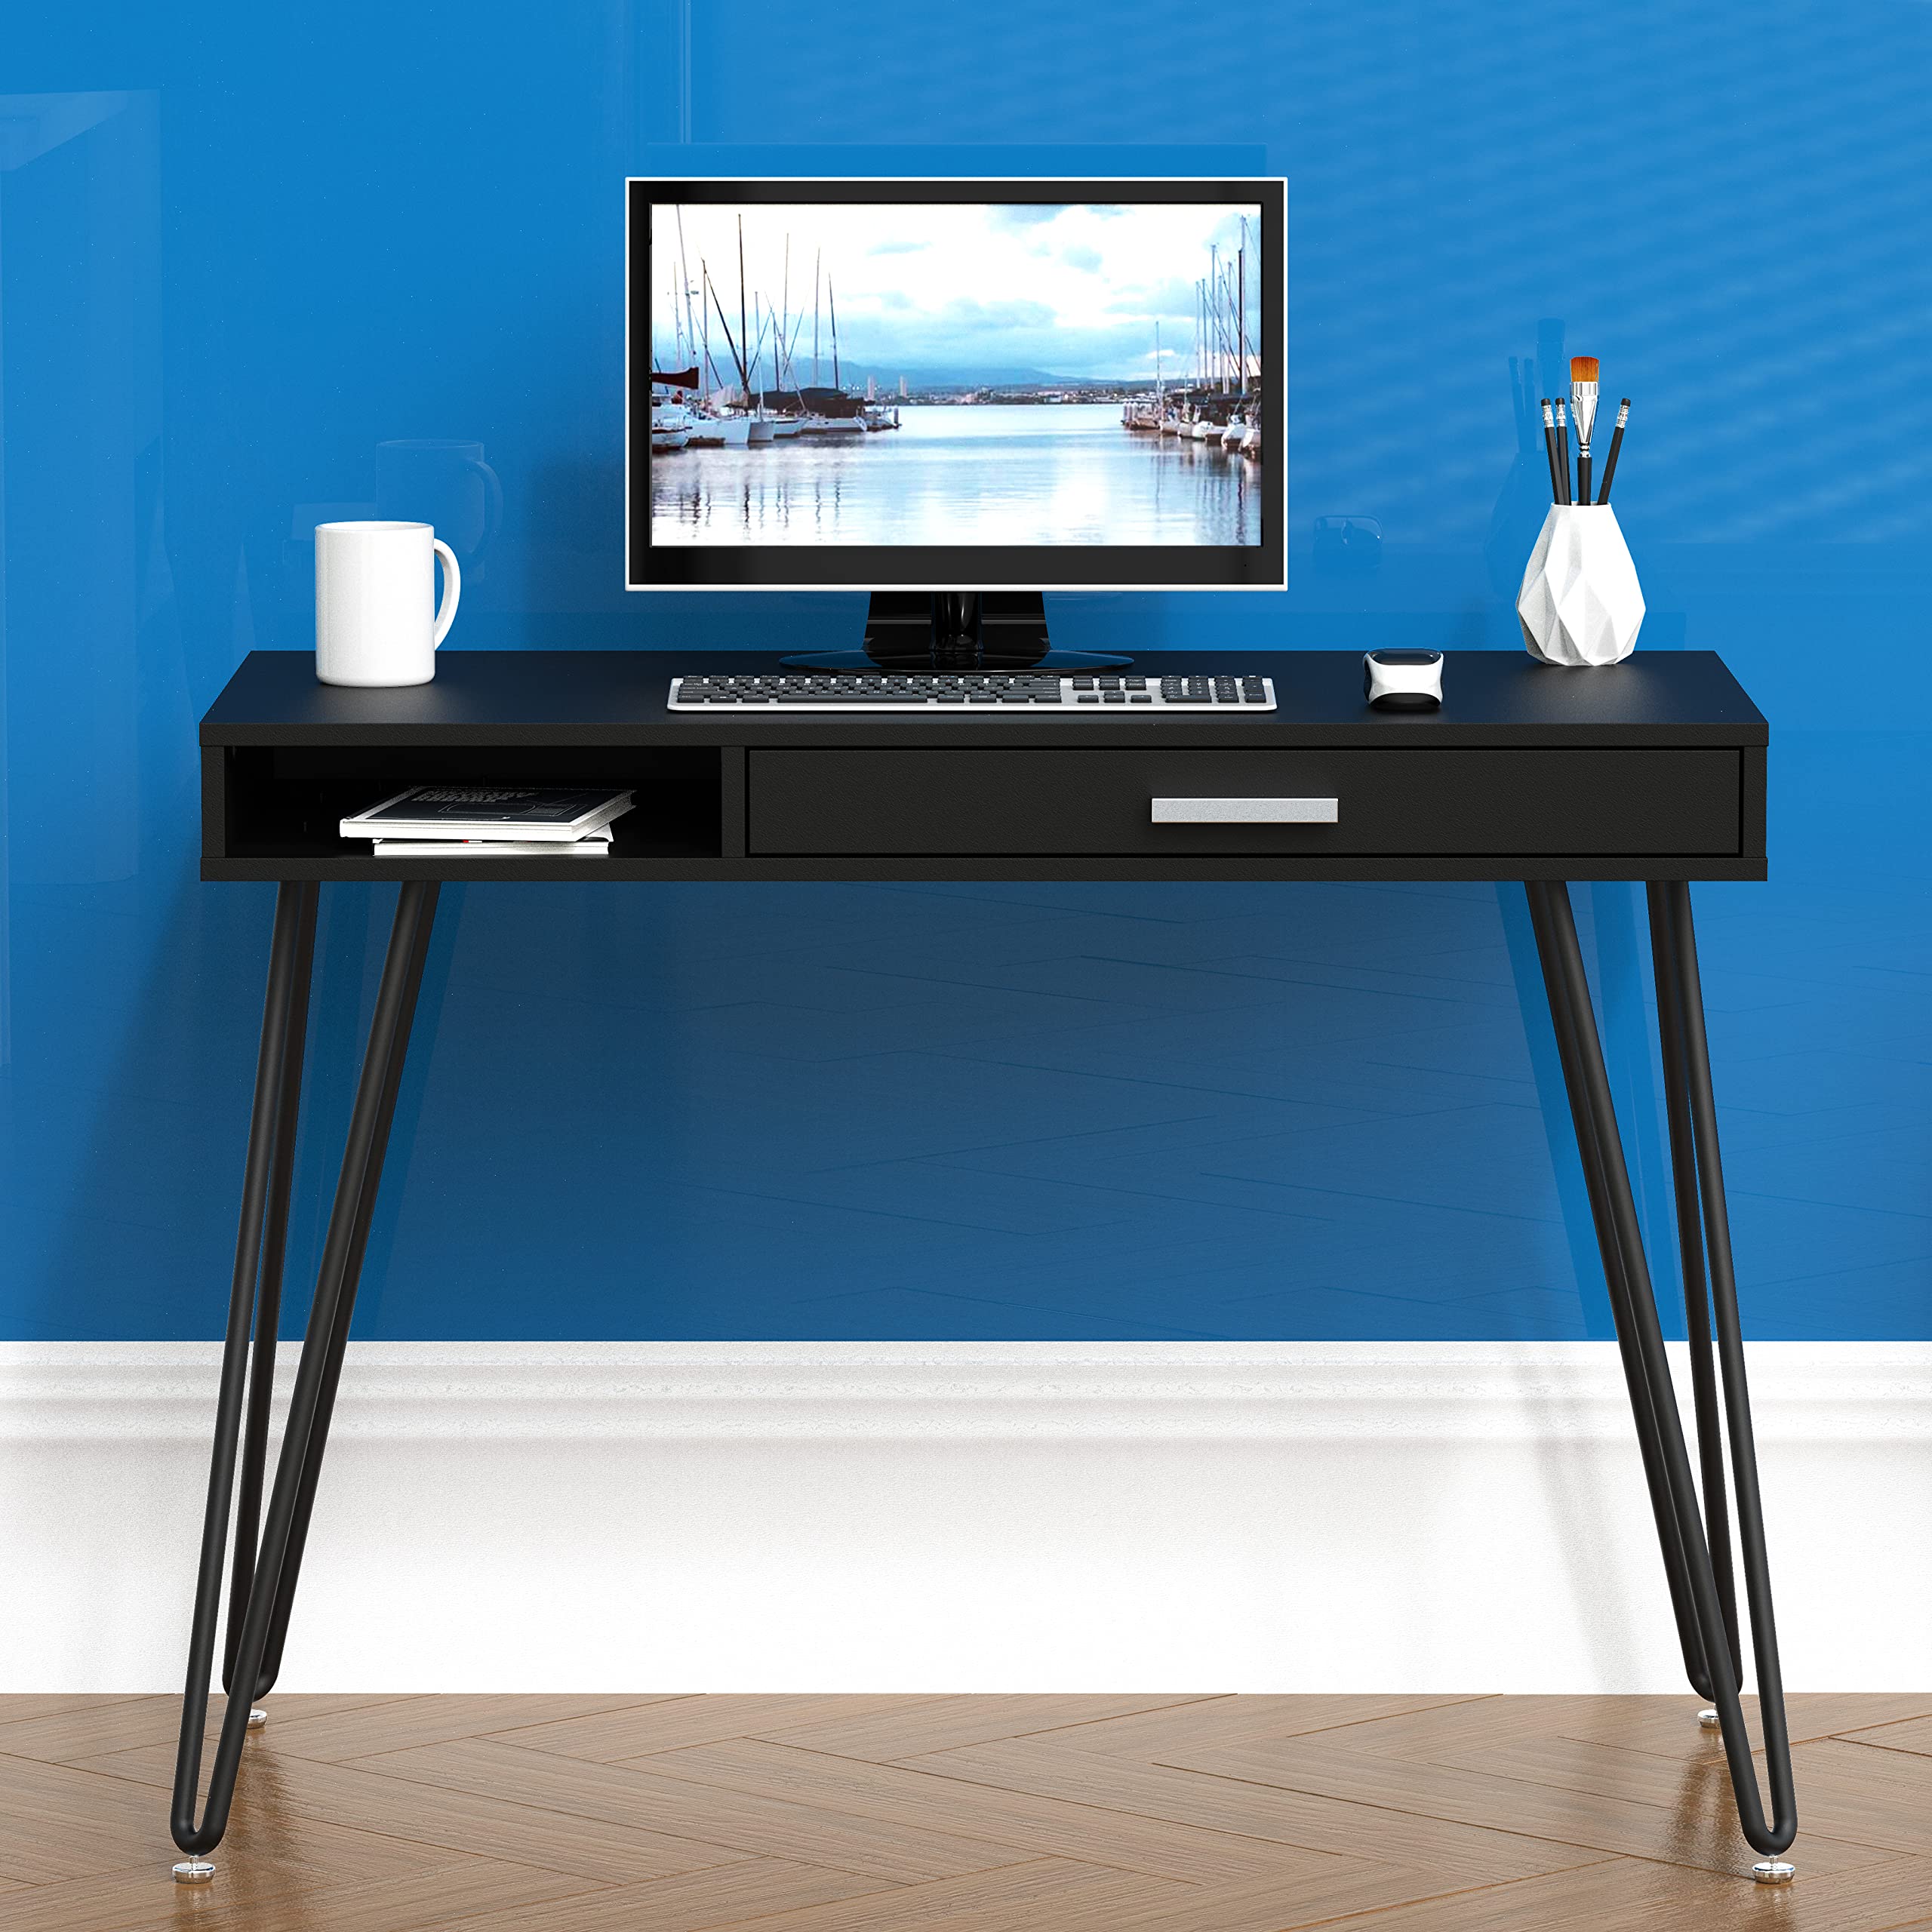 SHW Home Office Computer Hairpin Leg Desk with Drawer, Black